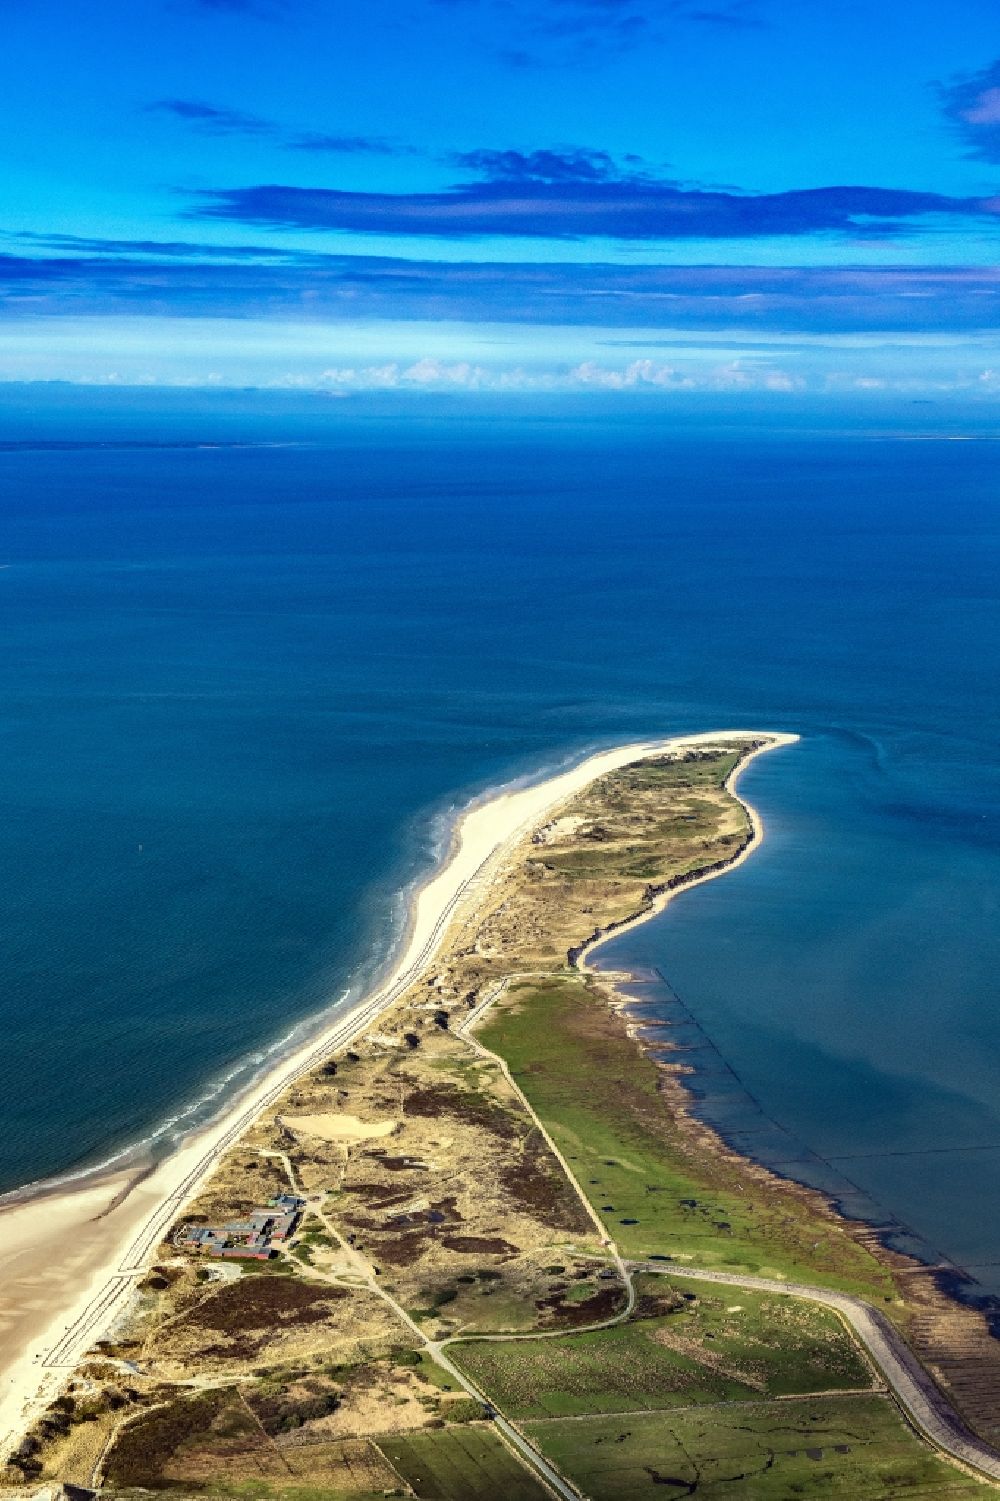 Norddorf from the bird's eye view: Wadden Sea of a??a??the North Sea coast with the northern tip of the island Amrum in Norddorf in the state Schleswig-Holstein, Germany